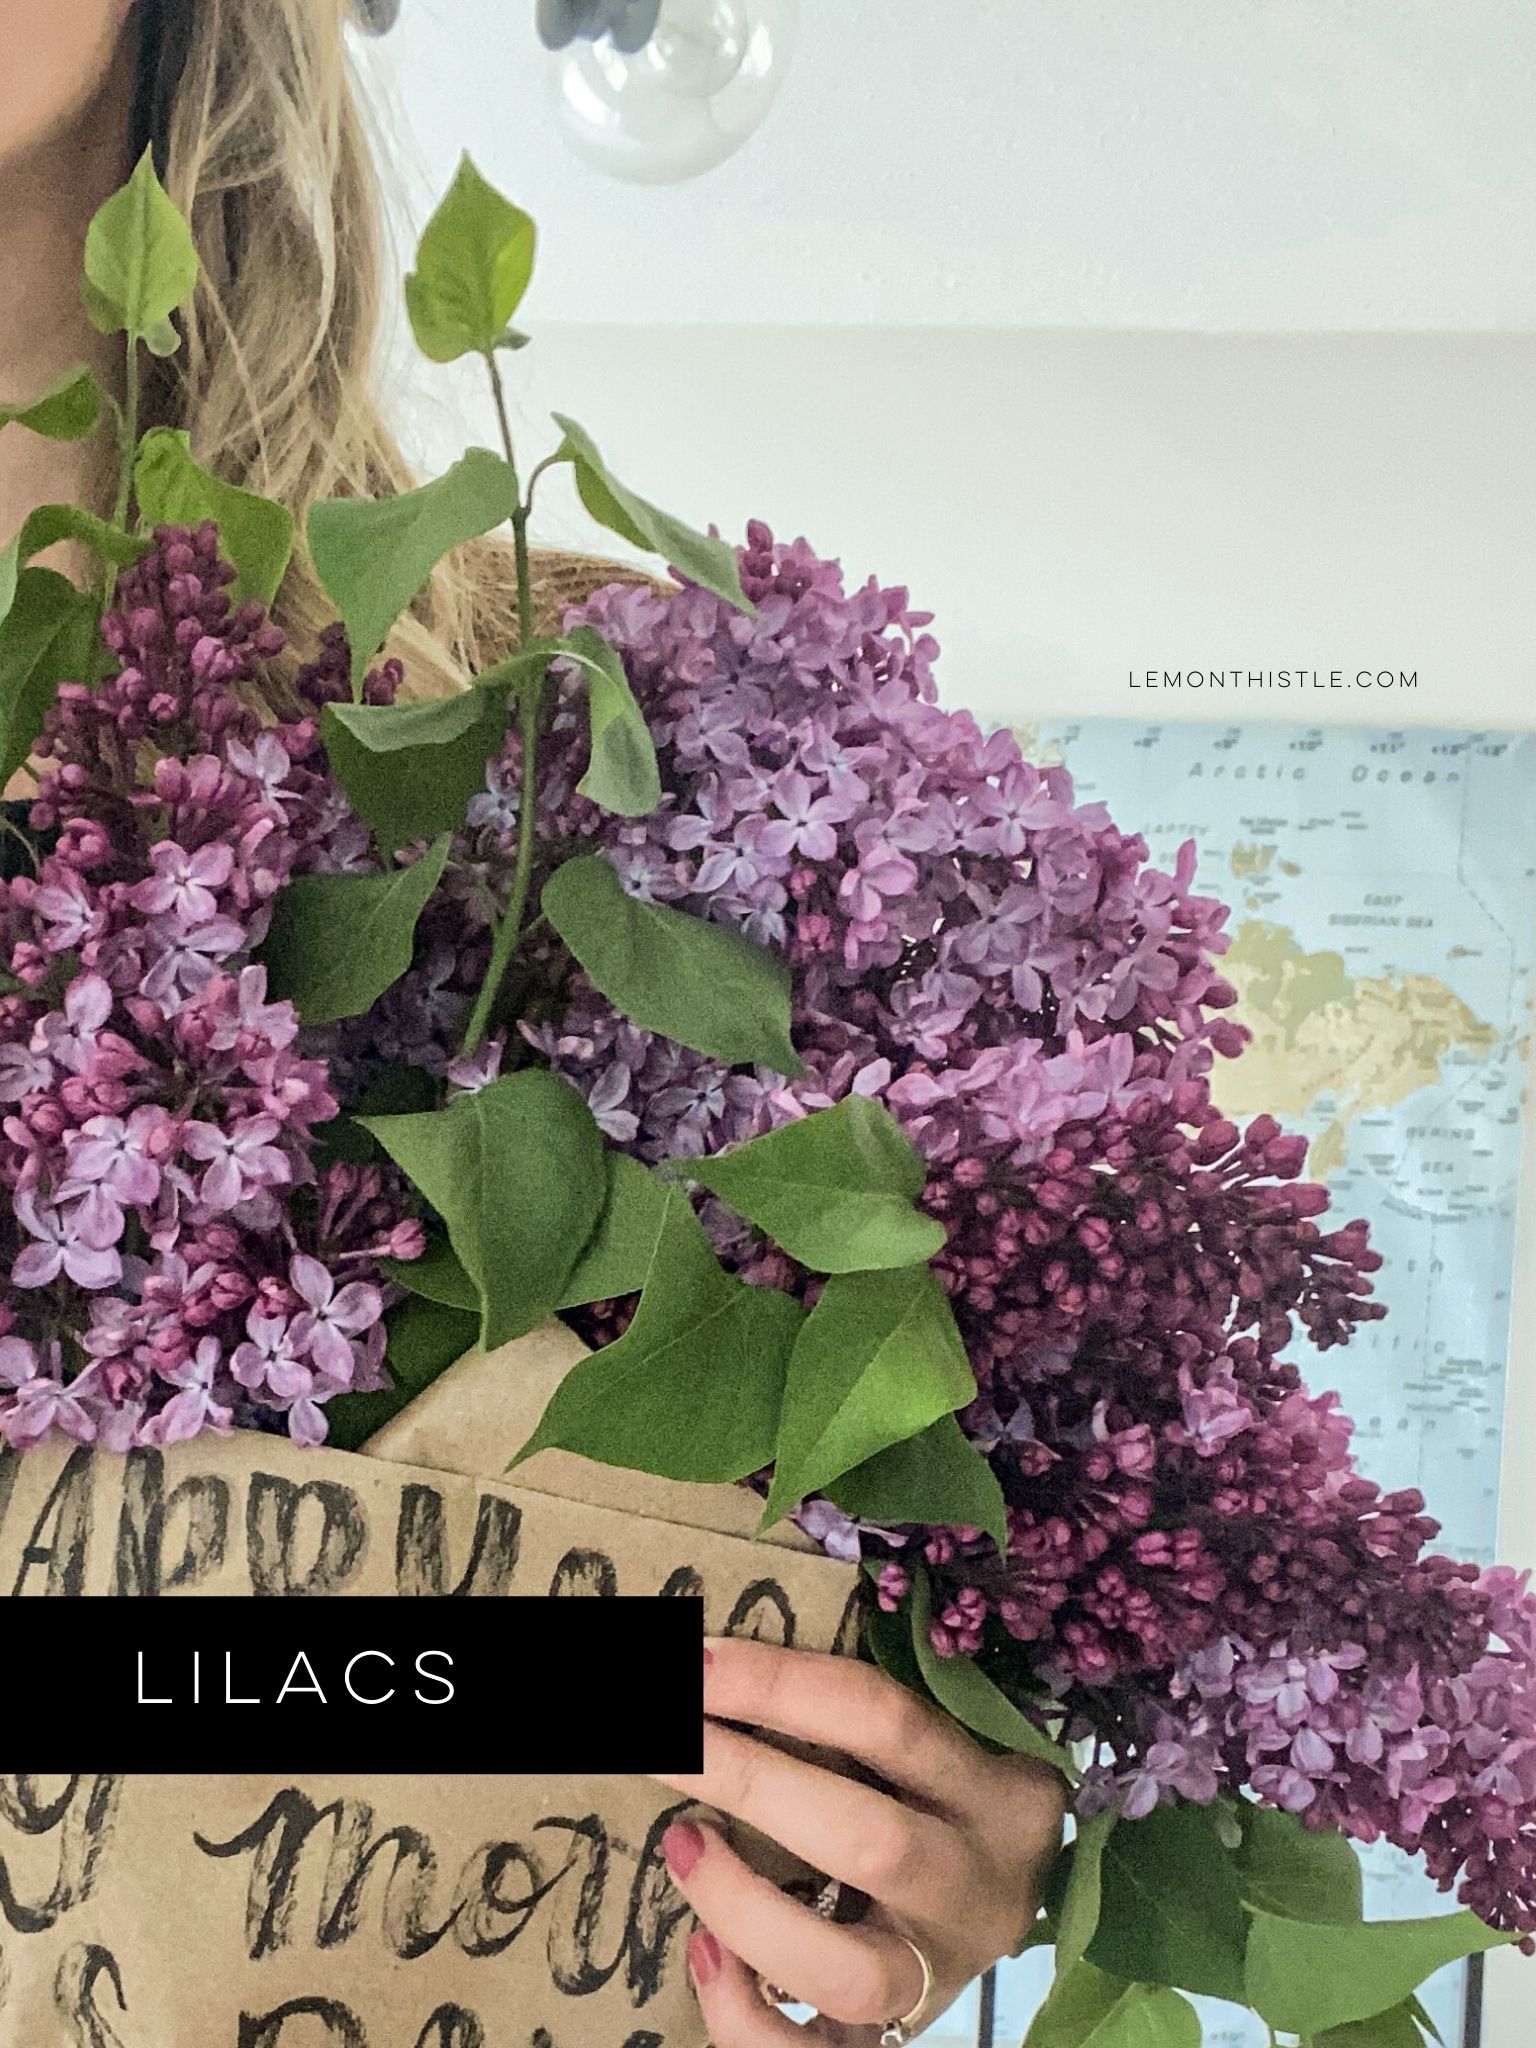 Lilacs and other cut flowers to grow at home